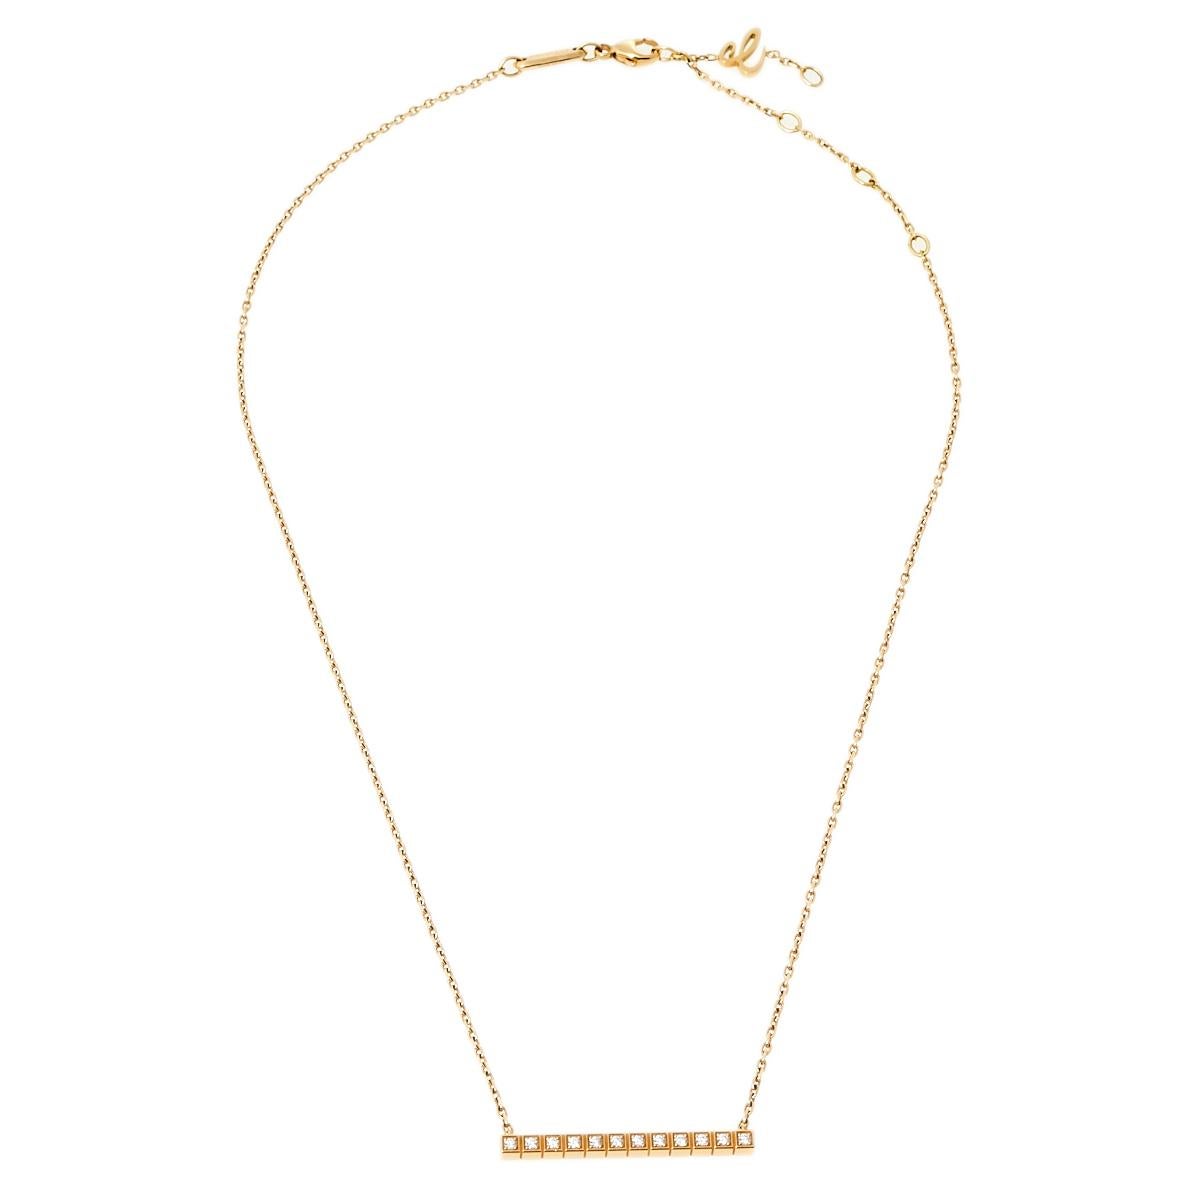 Chopard's Ice Cube collection has delivered some of the most luxurious jewelry pieces since 1999. Minimal yet classic, this tasteful Chopard Ice Cube necklace is made from 18k yellow gold. It has a simple chain and a stunning pendant embedded with